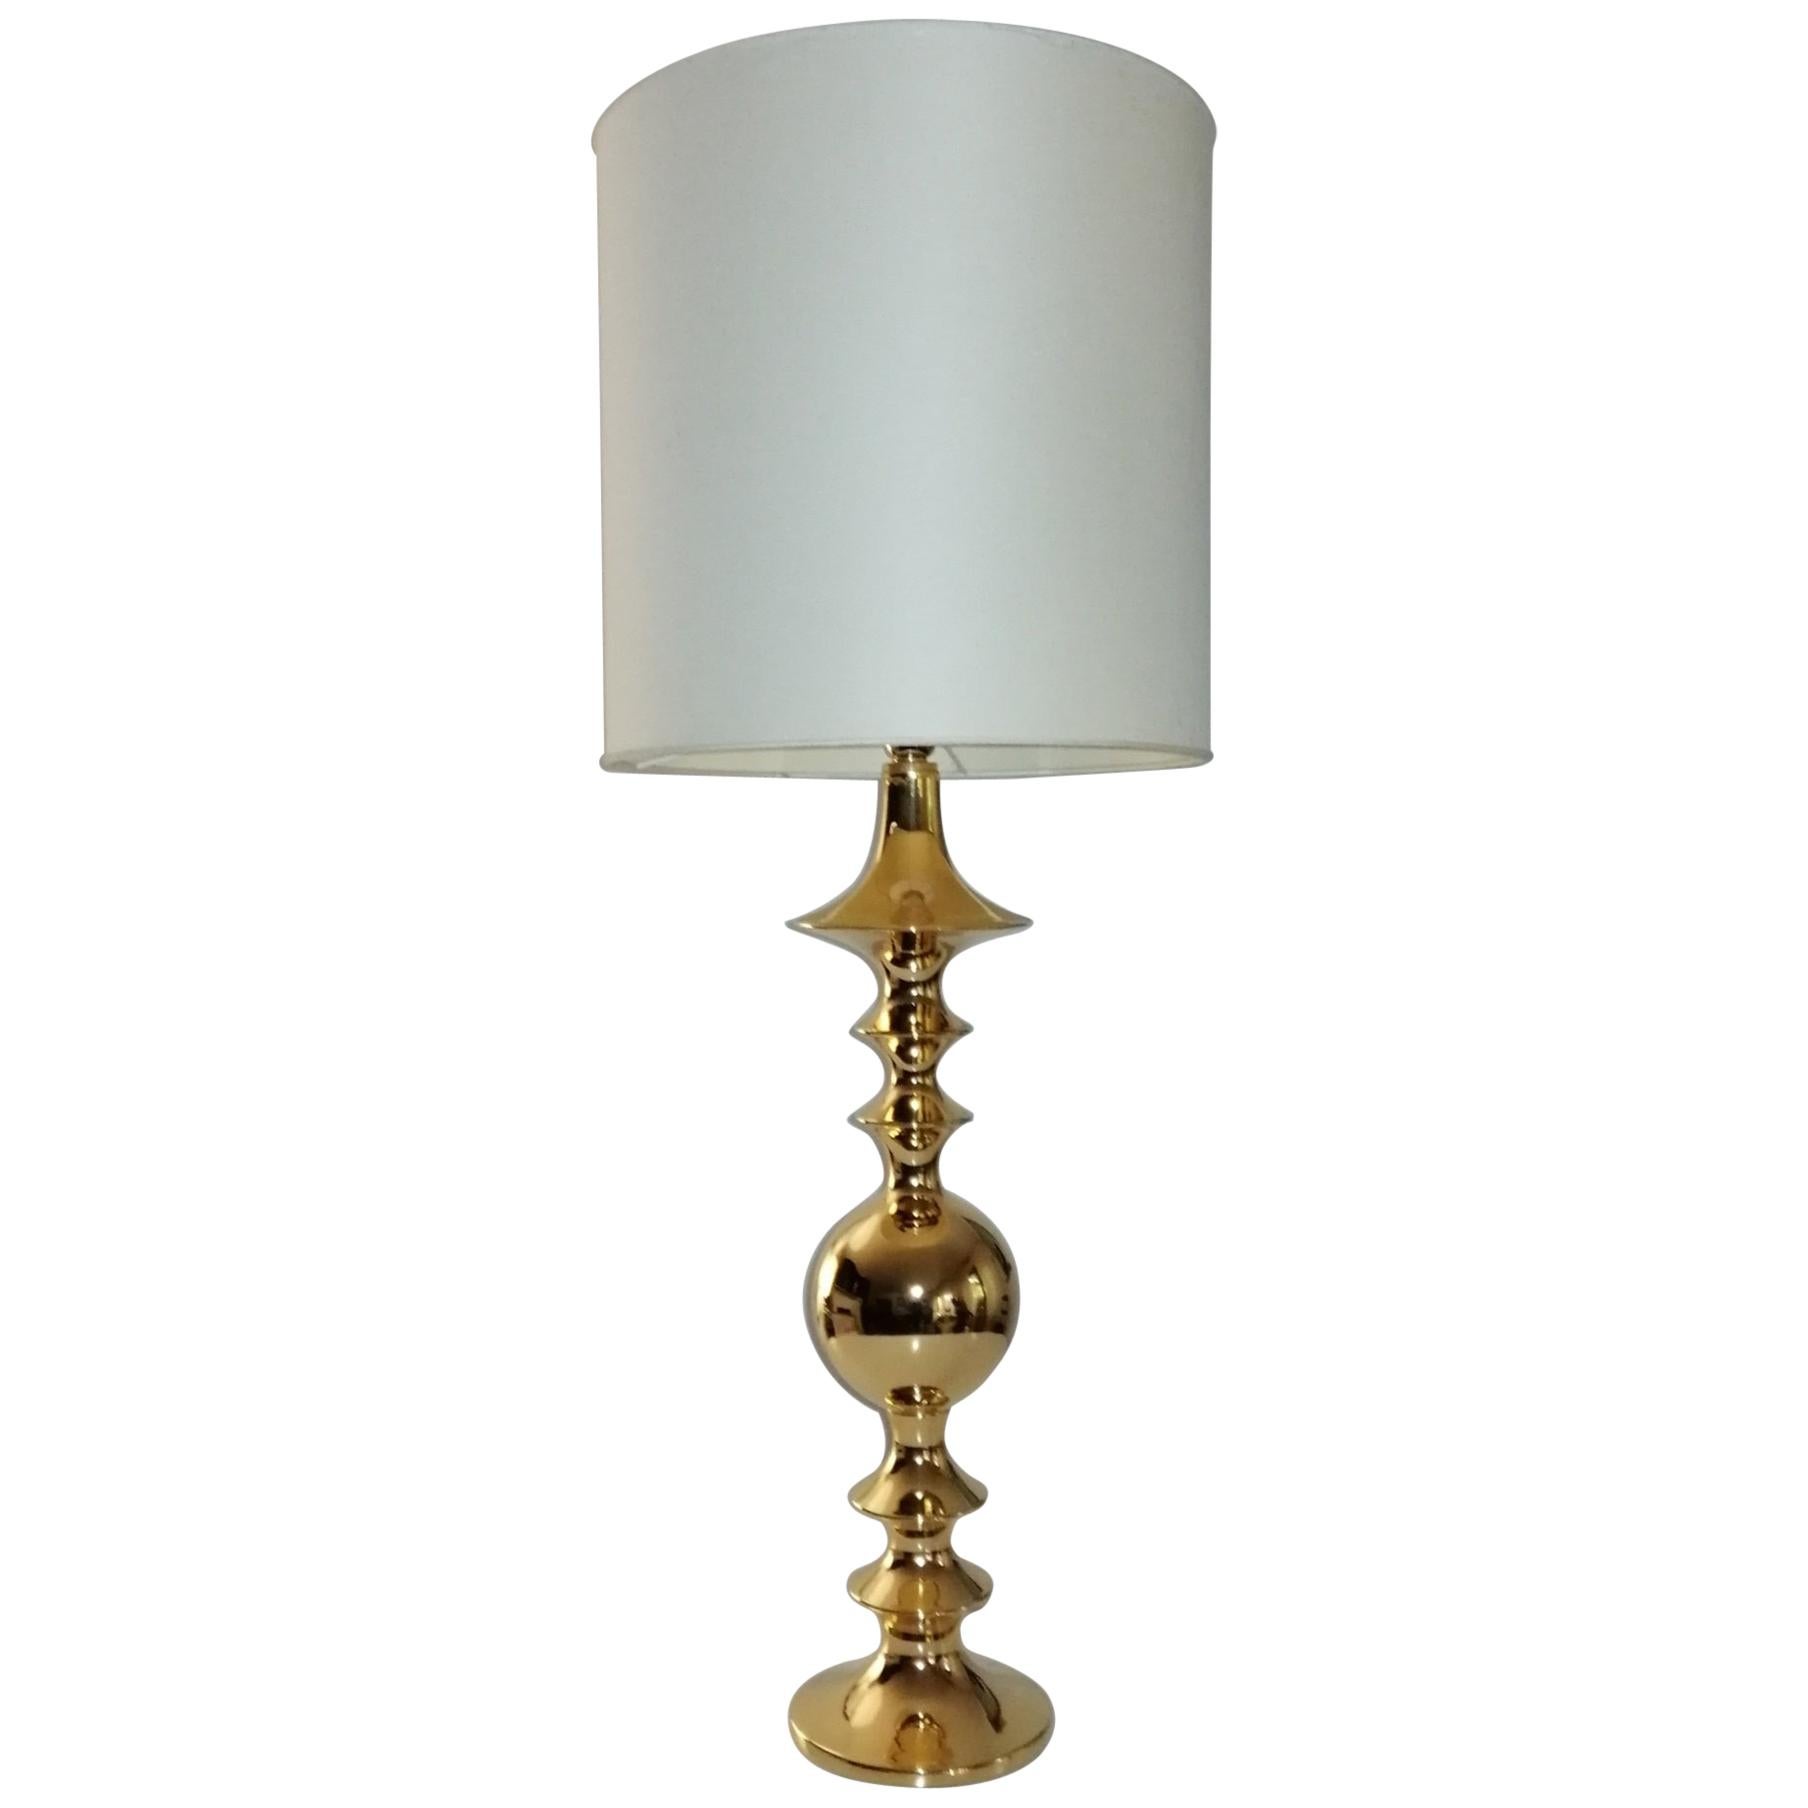 Ceramic Lamp "BRIX II" Handcrafted in 24-Karat Gold by Gabriella B Made in Italy For Sale